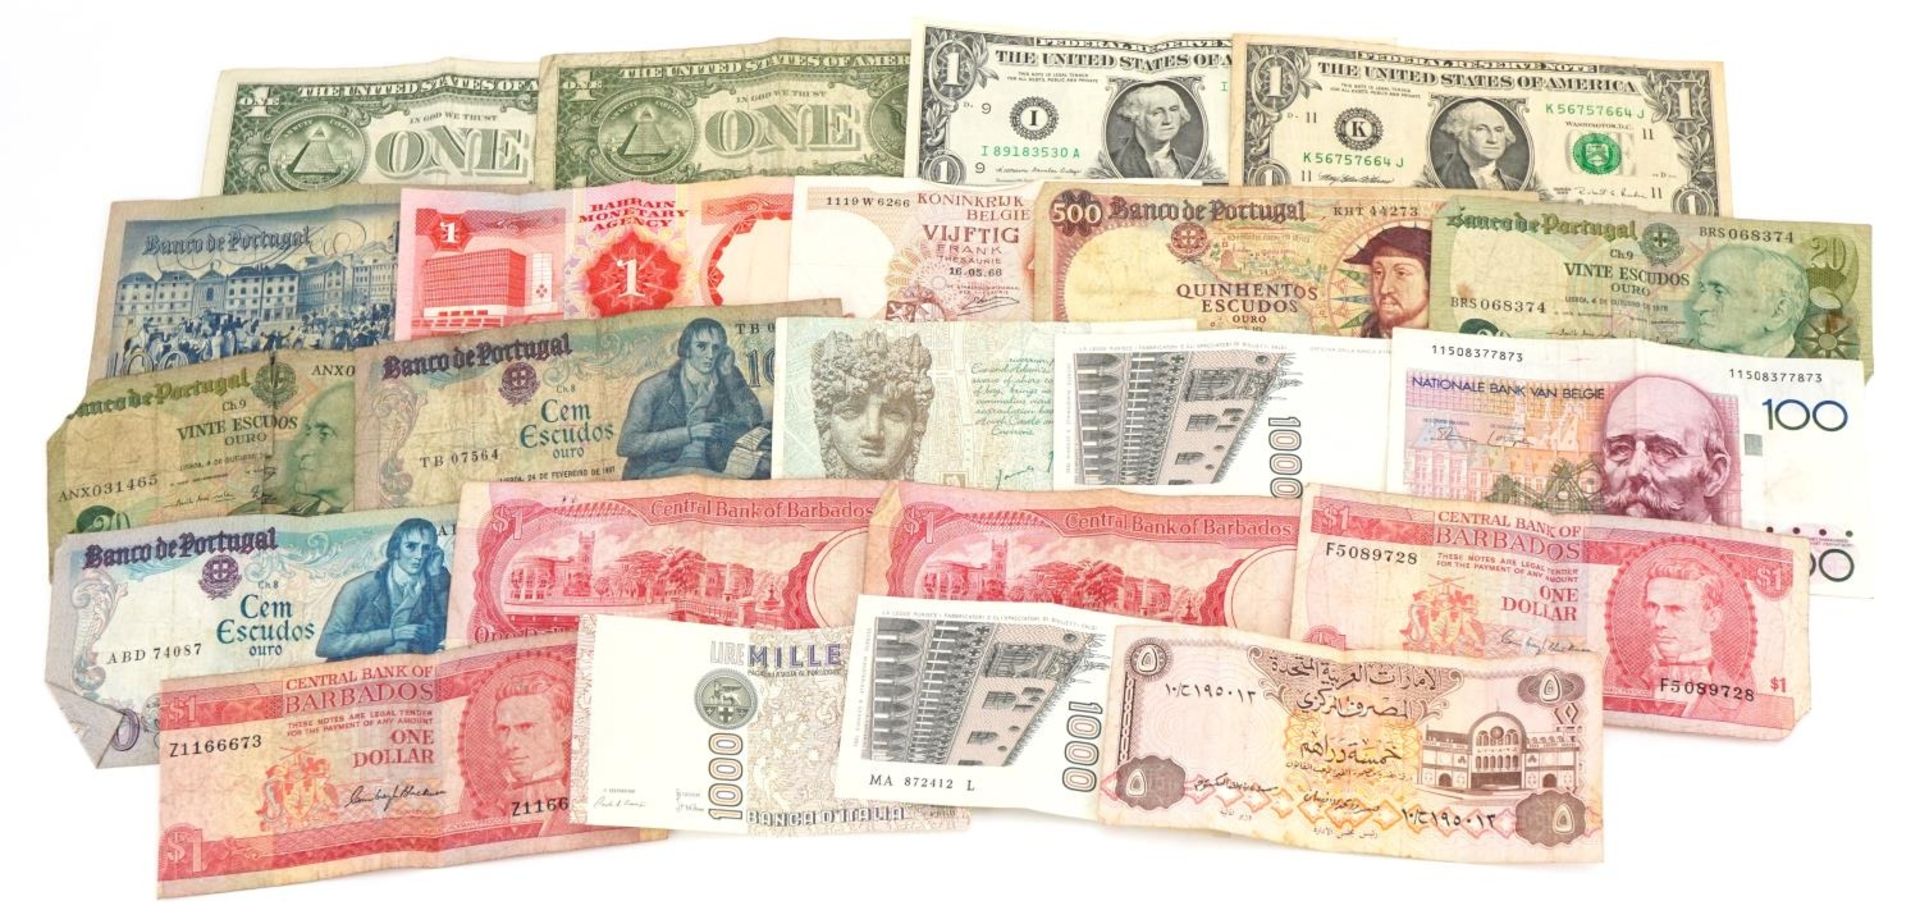 United States of America and world banknotes including one dollar For further information on this